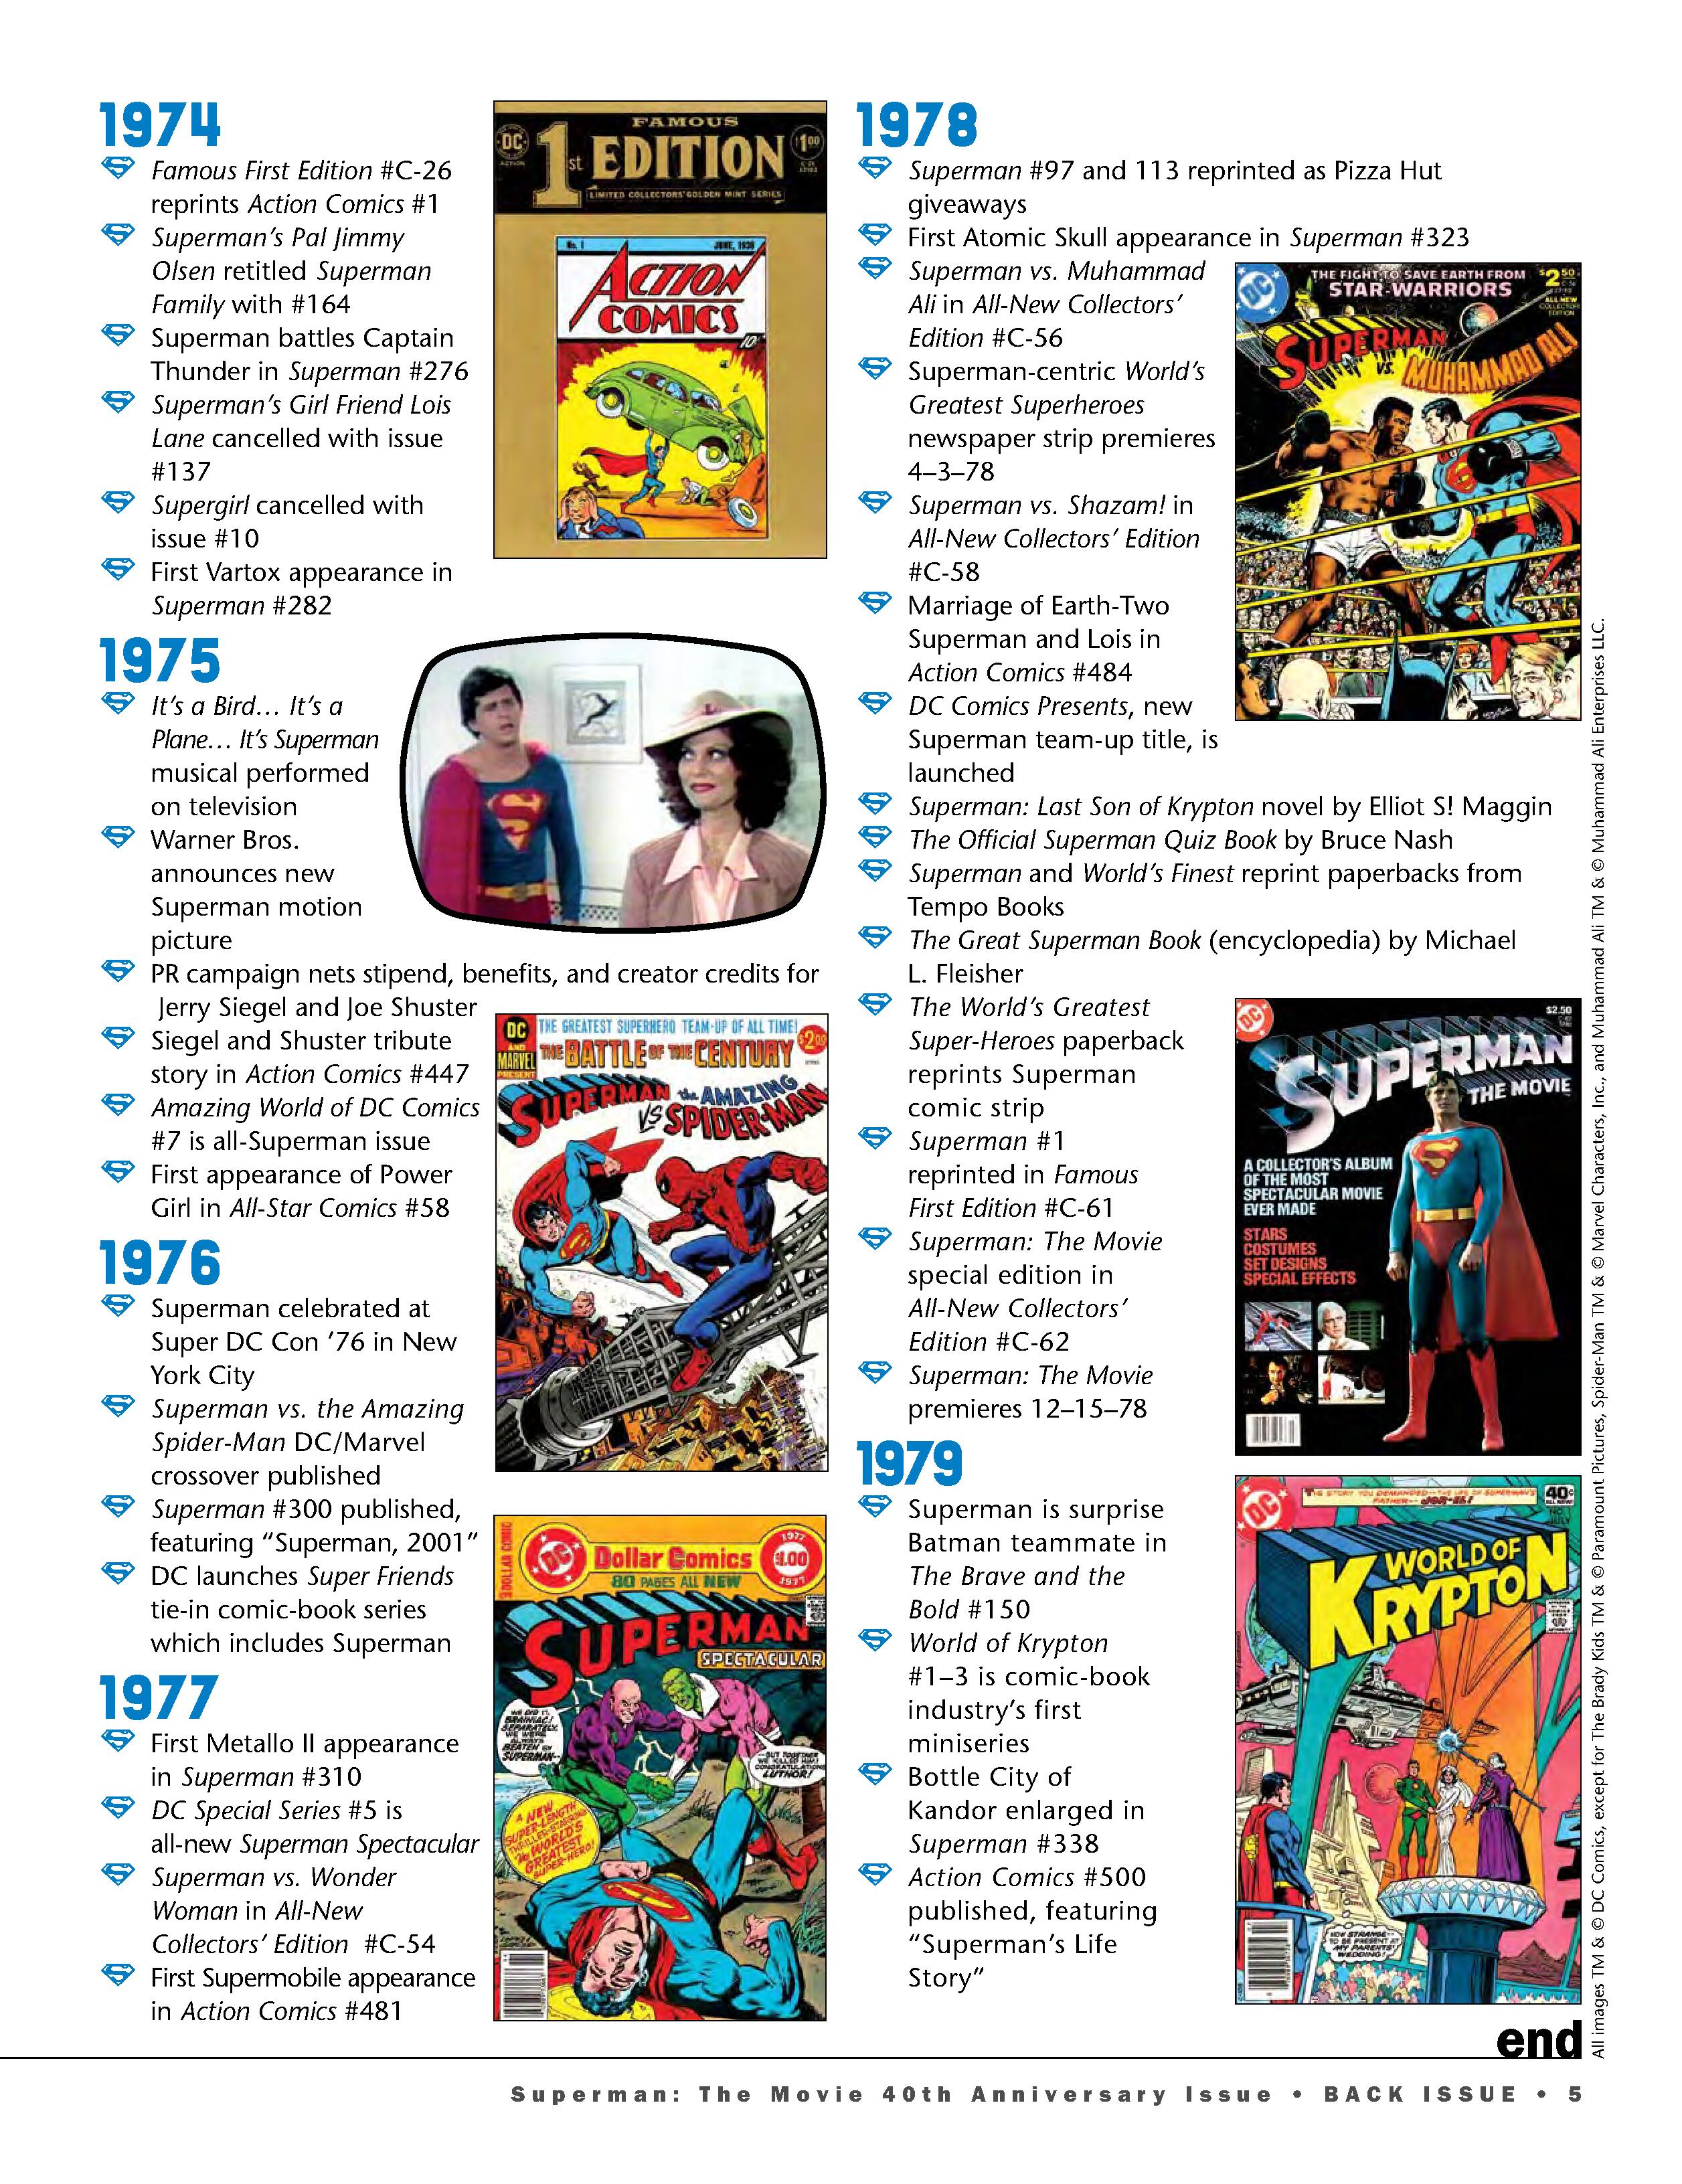 Read online Back Issue comic -  Issue #109 - 7